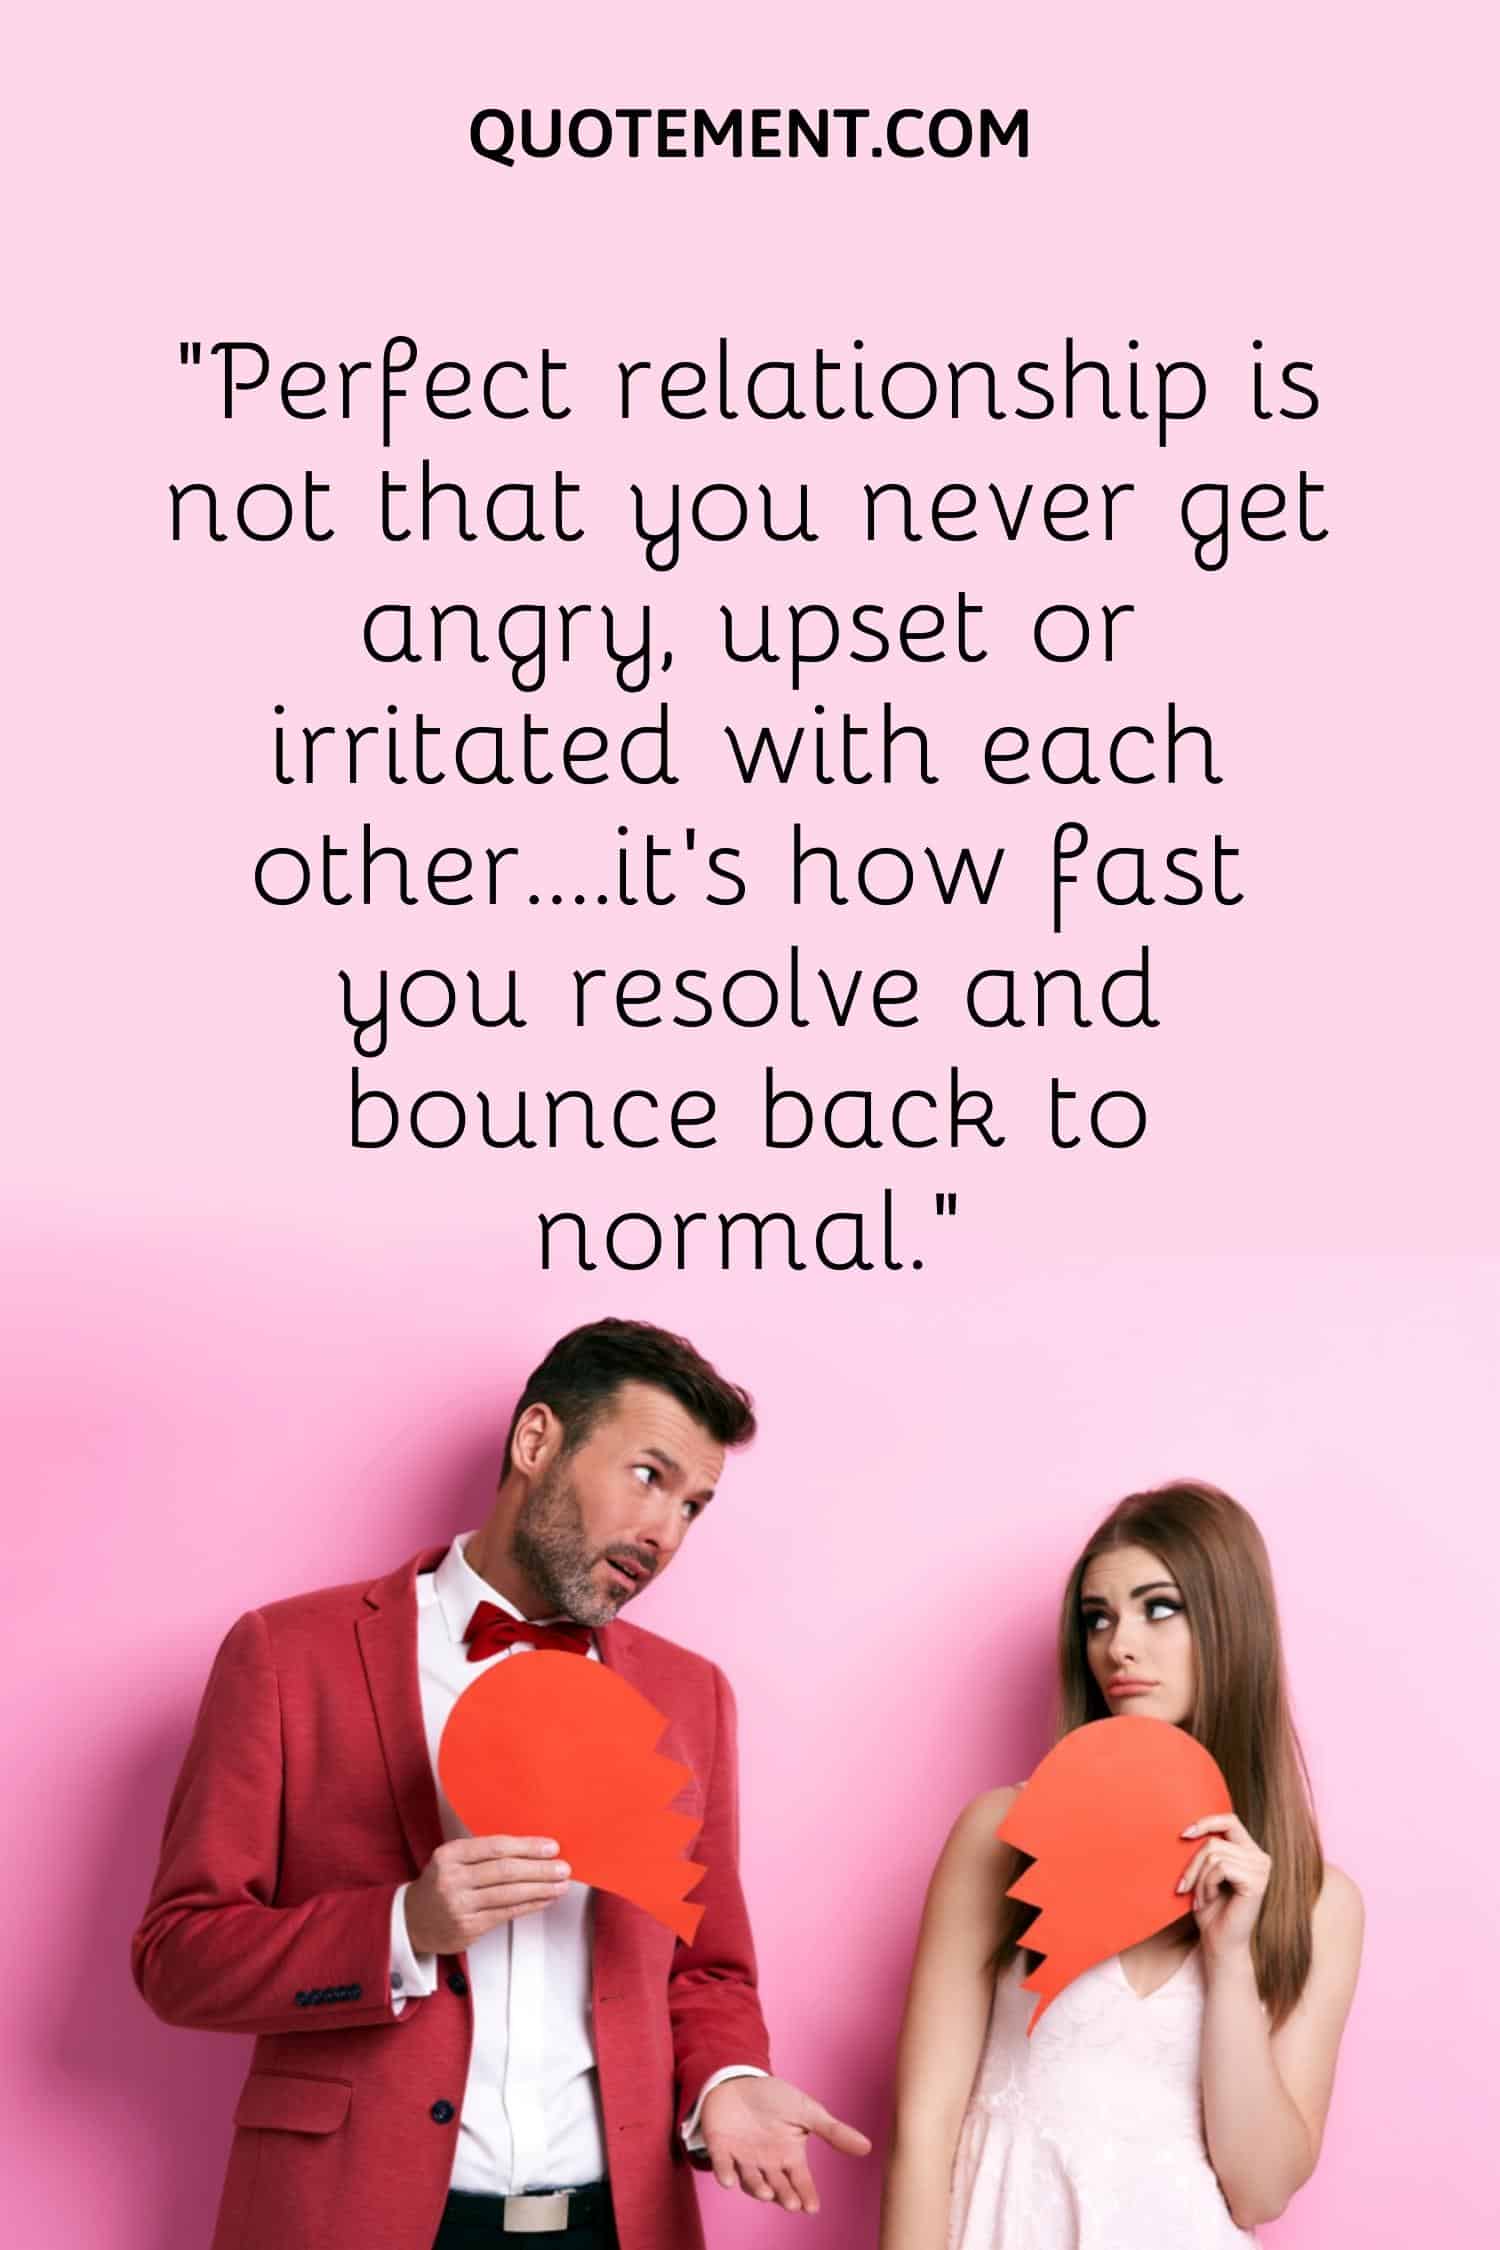 “Perfect relationship is not that you never get angry, upset or irritated with each other….it’s how fast you resolve and bounce back to normal.”